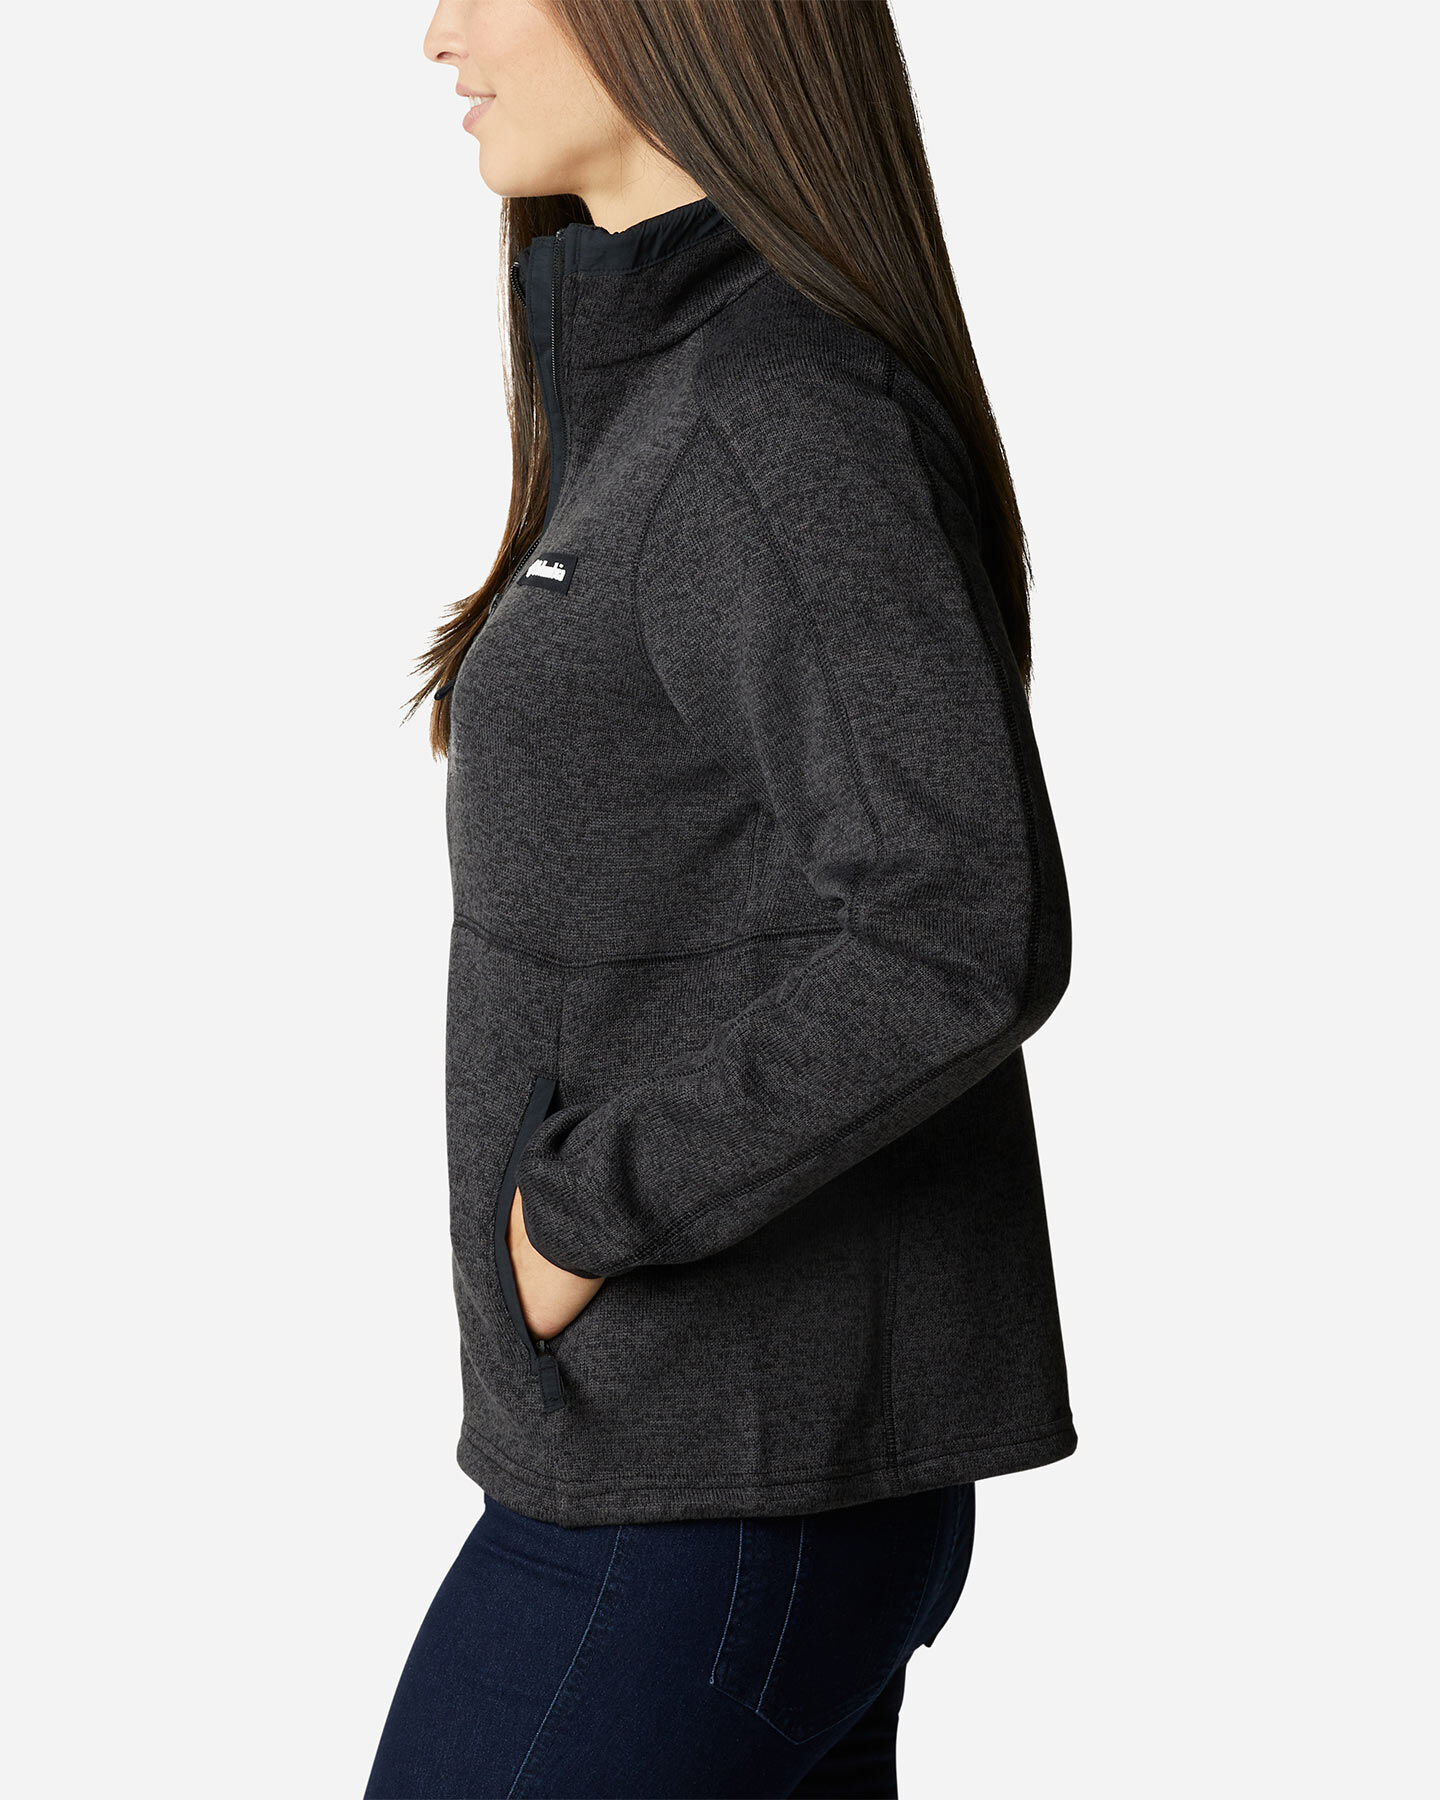  Pile COLUMBIA SWEATER WEATHER S5440944|010|XS scatto 2